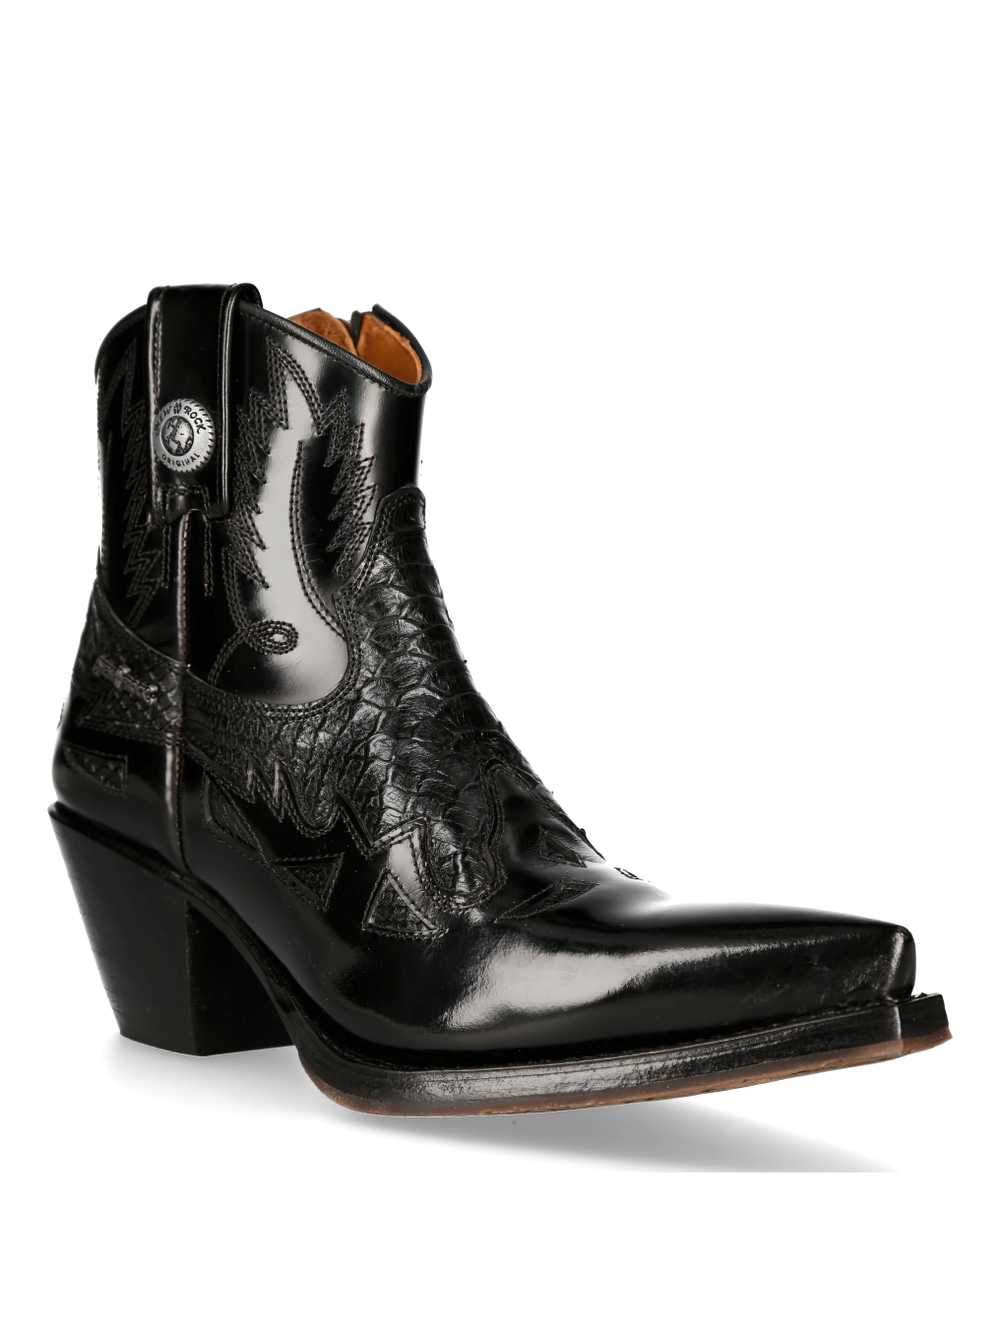 NEW ROCK Embossed Black Western High Boots with Zipper